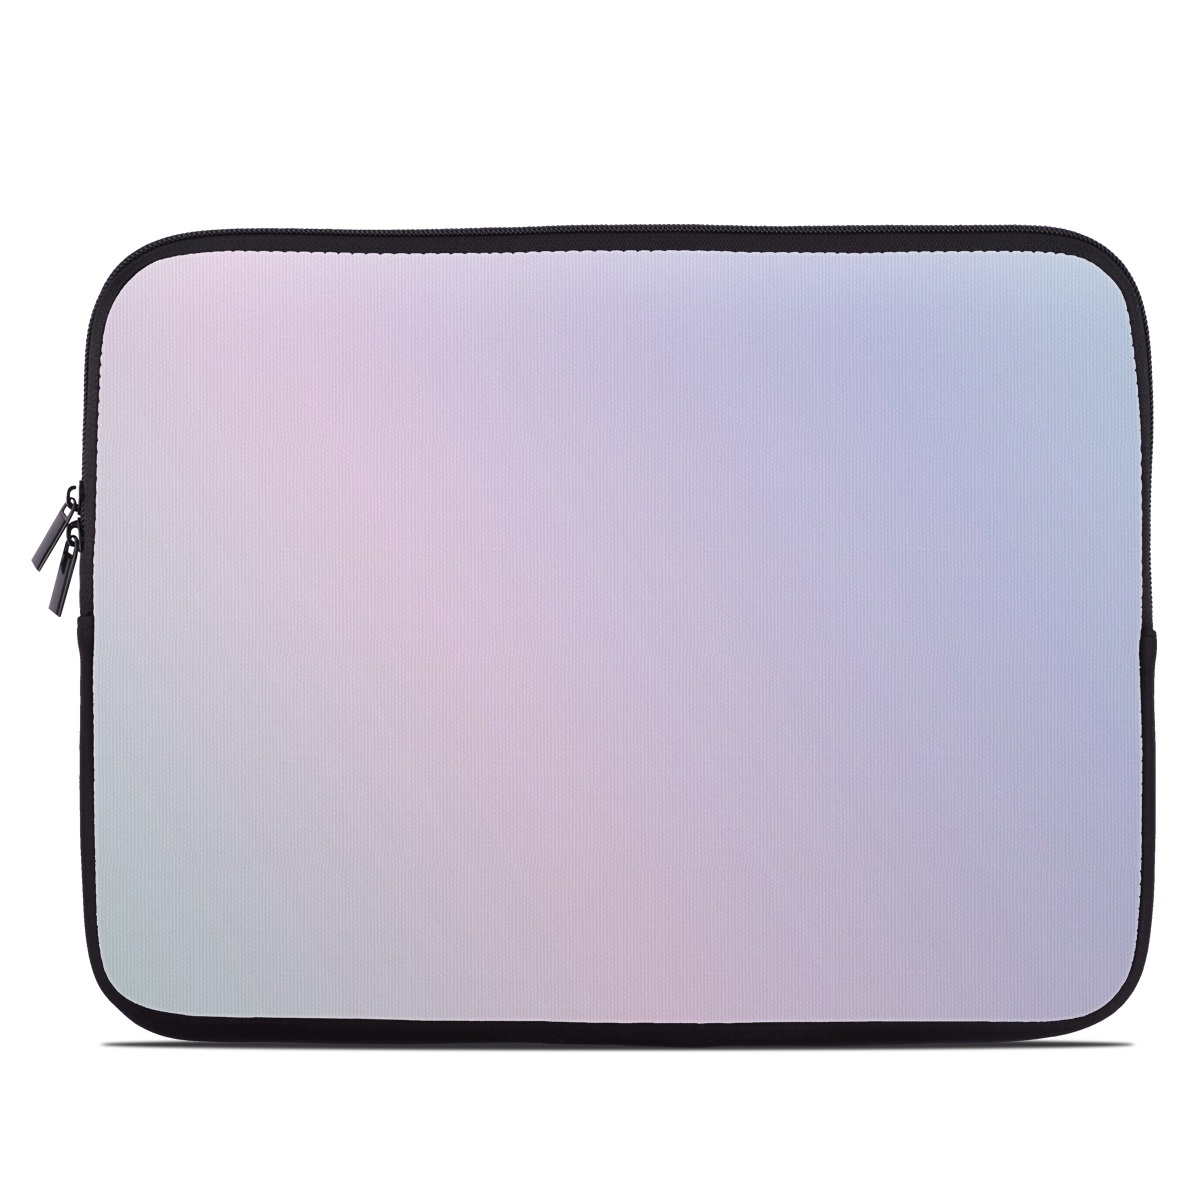 Laptop Sleeve - Cotton Candy (Image 1)